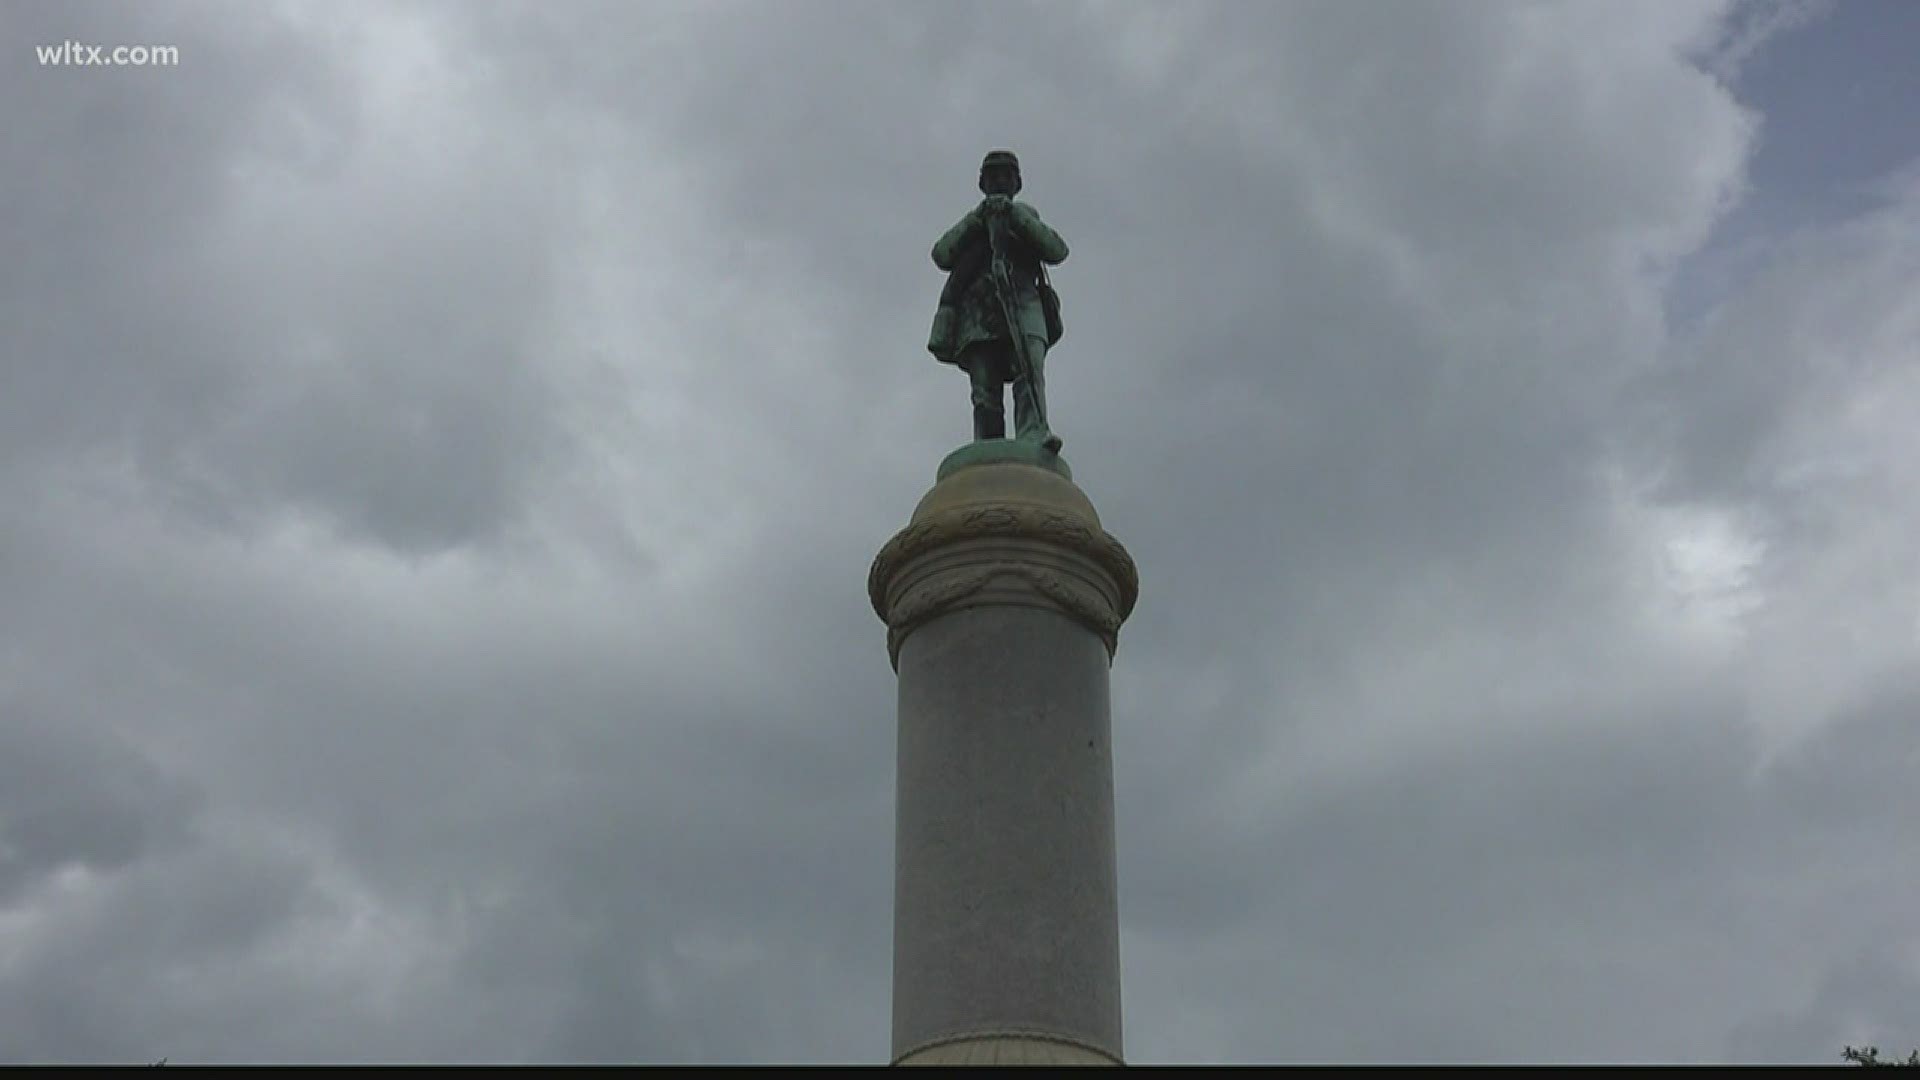 Residents think the statues should be removed